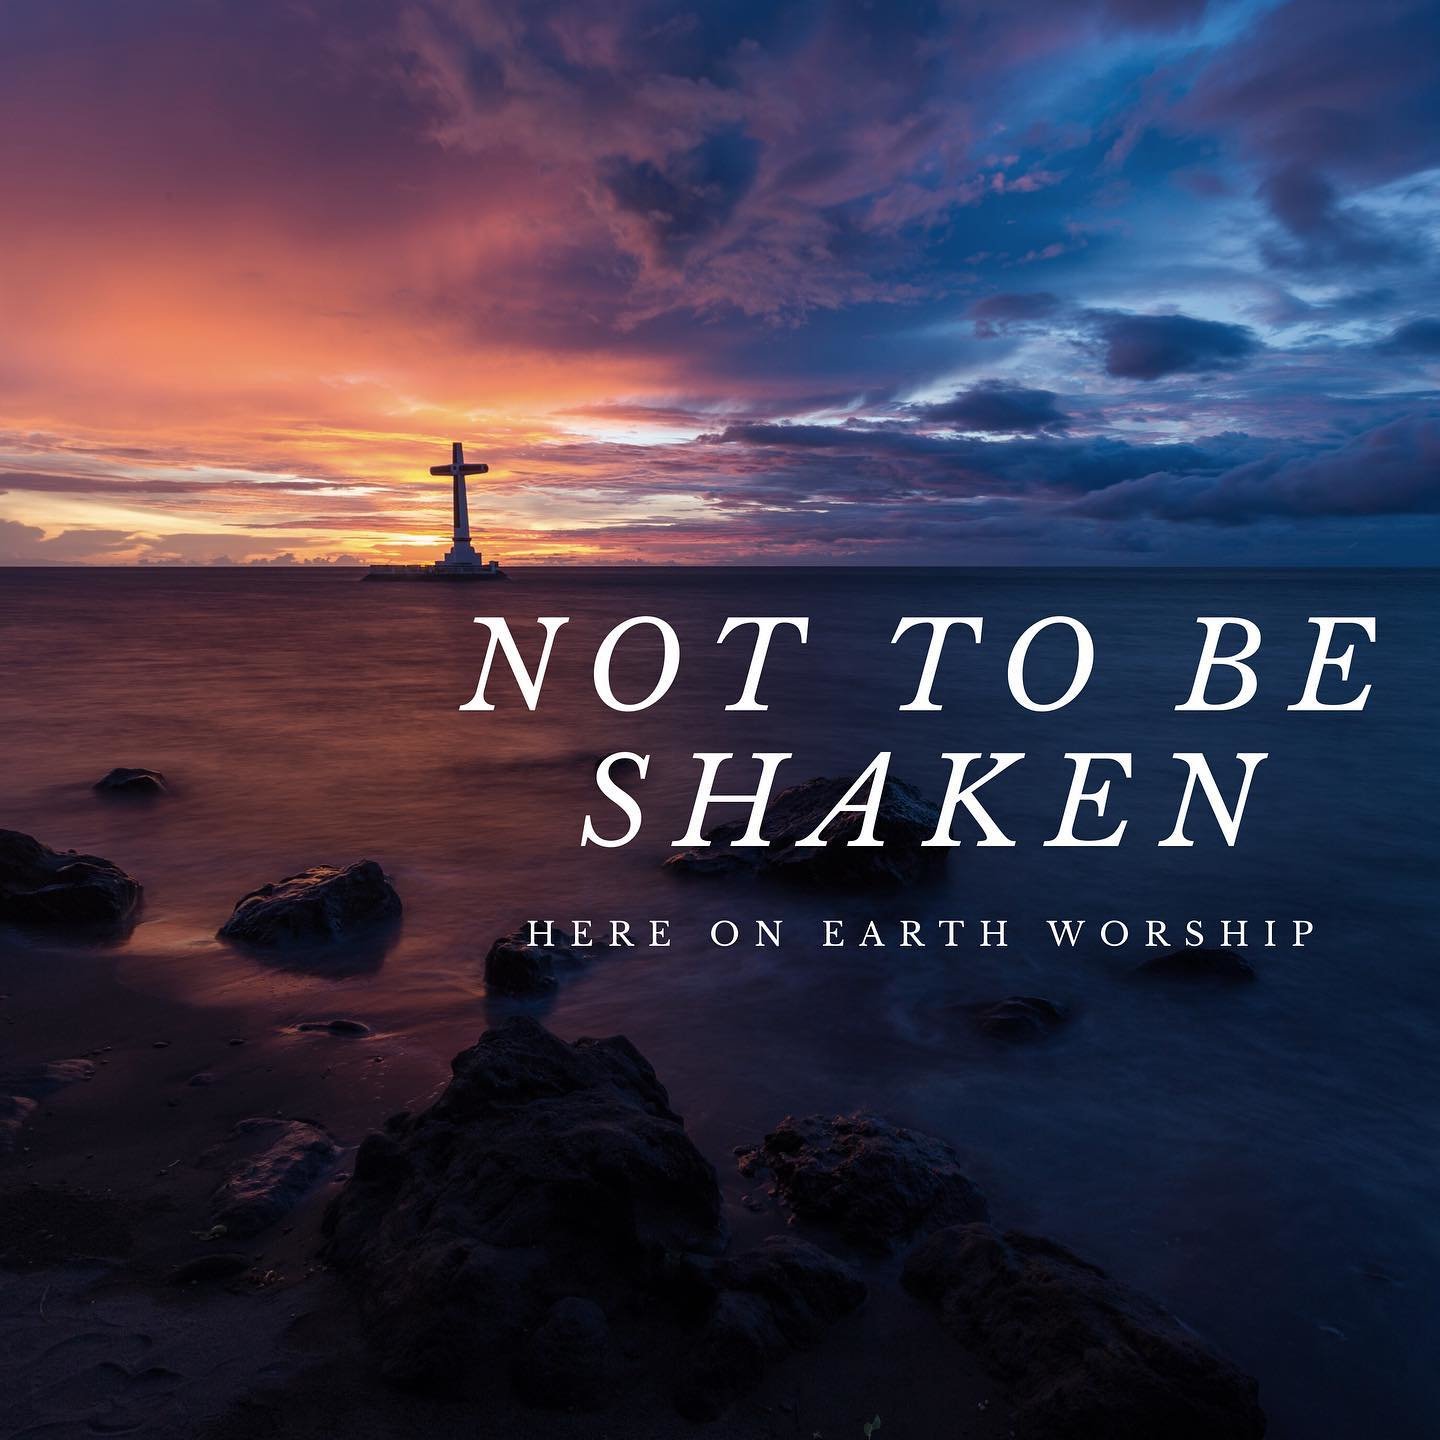 “Not to be Shaken” is available on Apple Music (iTunes), Spotify, Amazon Music, Pandora, and all other major streaming platforms.